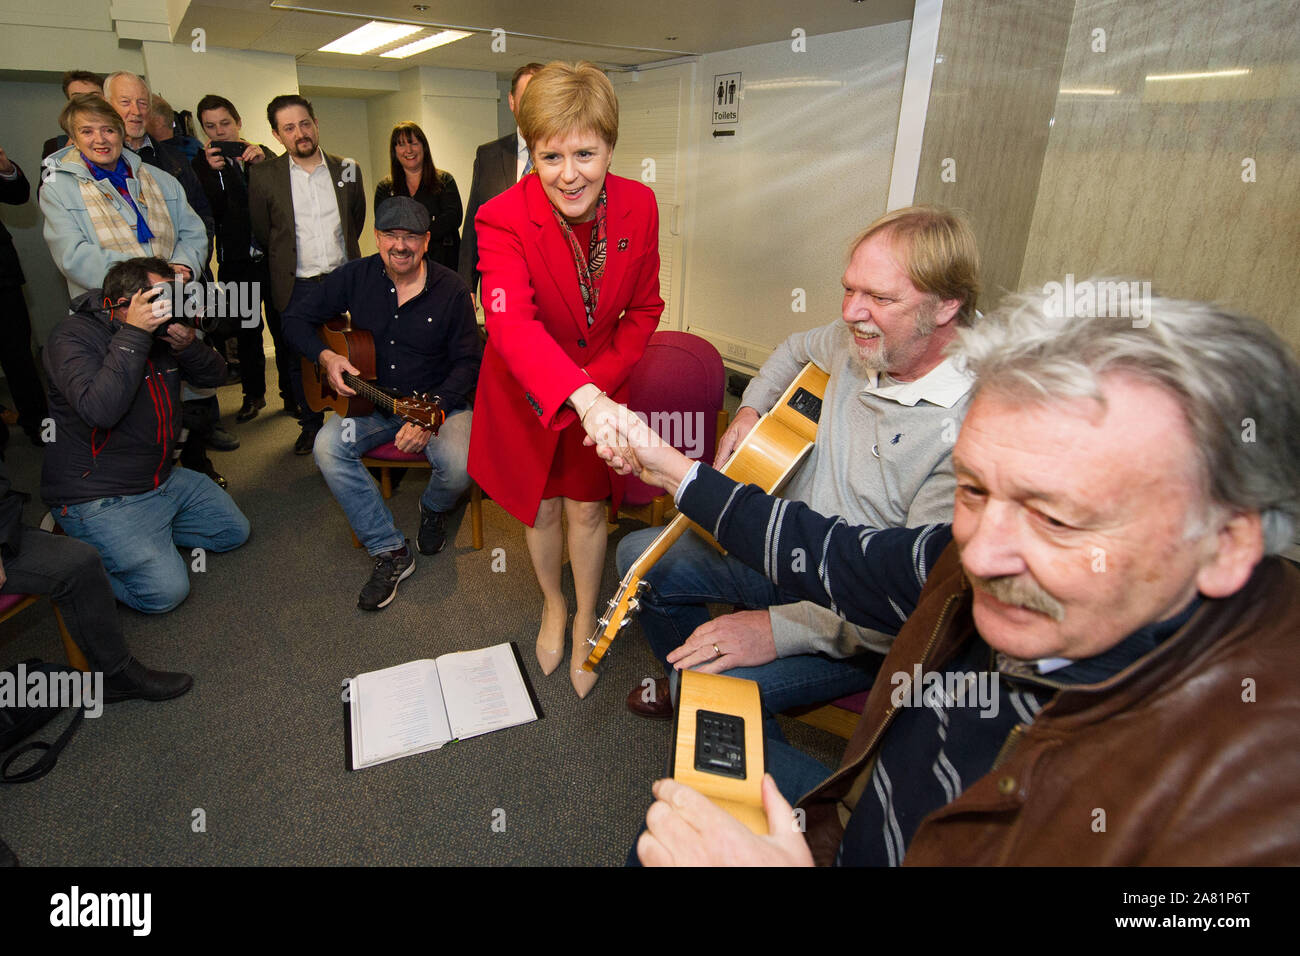 Dalkeith, UK. 5 November 2019. Pictured: Nicola Sturgeon MSP - First Minister of Scotland and Leader of the Scottish National Party (SNP).   First Minister Nicola Sturgeon joins Owen Thompson, SNP candidate for Midlothian, to campaign in Dalkeith. Speaking ahead of the visit, Nicola Sturgeon said: “Brexit is far from a done deal.”  “Even if Boris Johnson was to get his deal passed, that would only be the beginning – not the end – of trade talks with the EU.”    Credit: Colin Fisher/Alamy Live News. Stock Photo